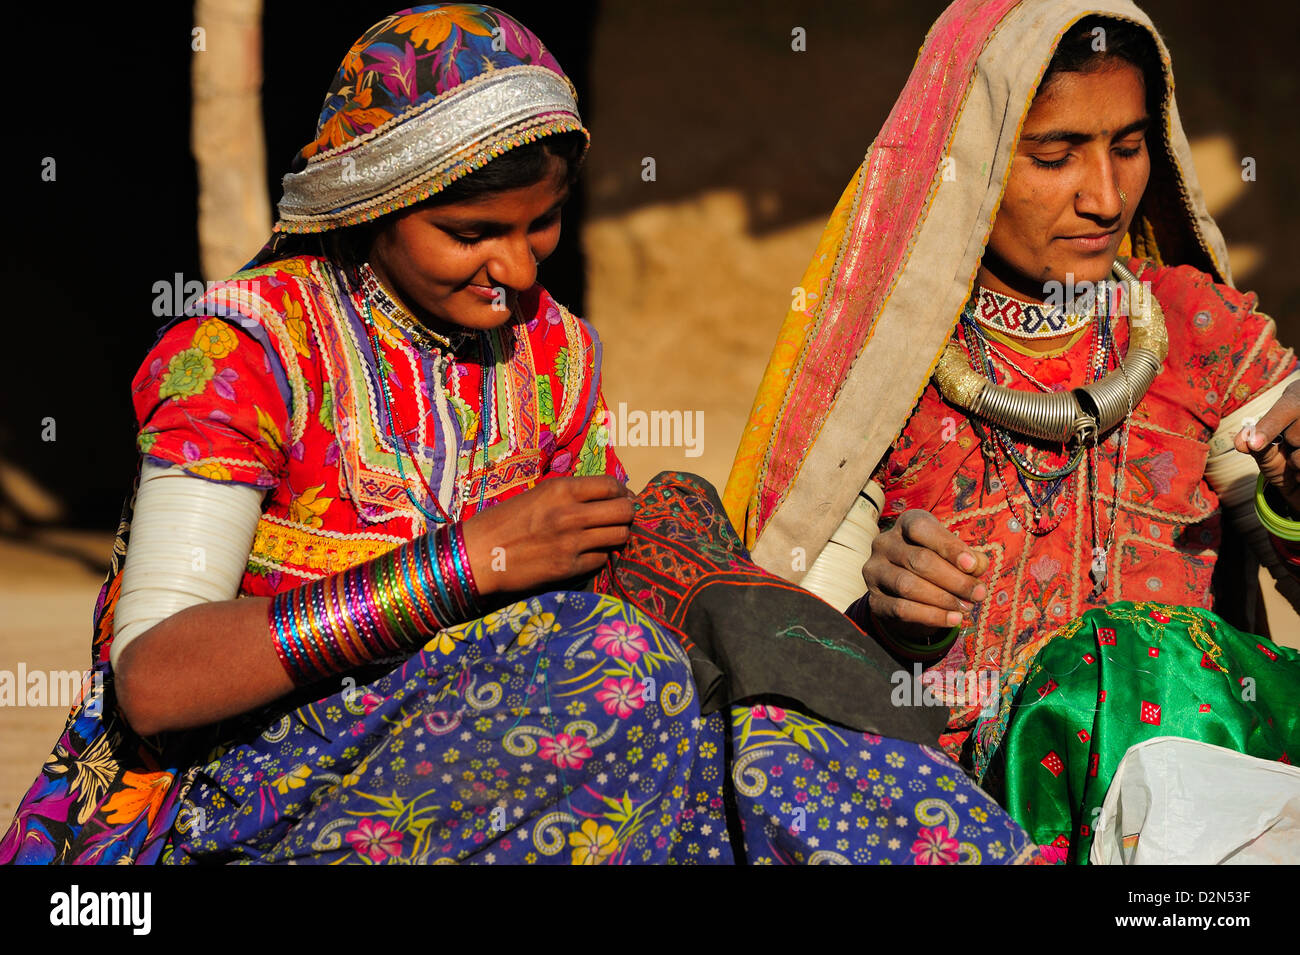 Mir tribal women with traditional attire doing embroidery work, Gujarat, India, Asia Stock Photo